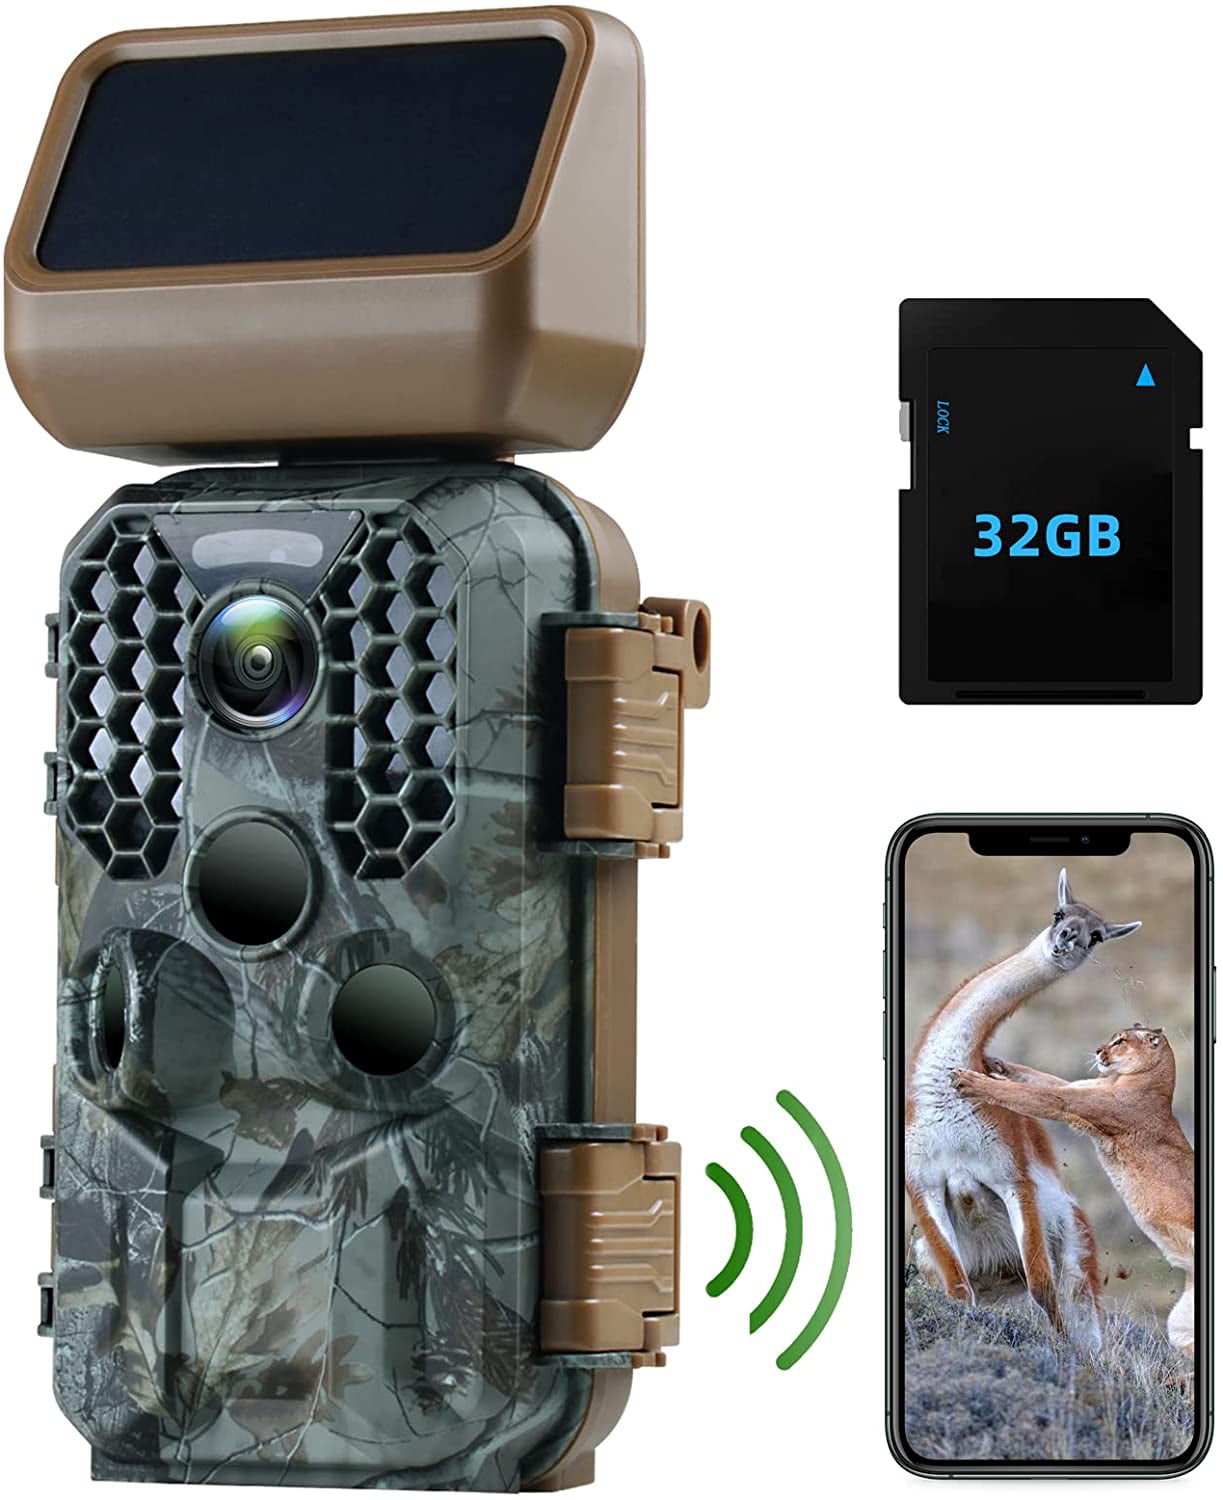 New Tactacam Reveal 24MP Cellular Trail Camera Verizon Free 2 Day Shipping 